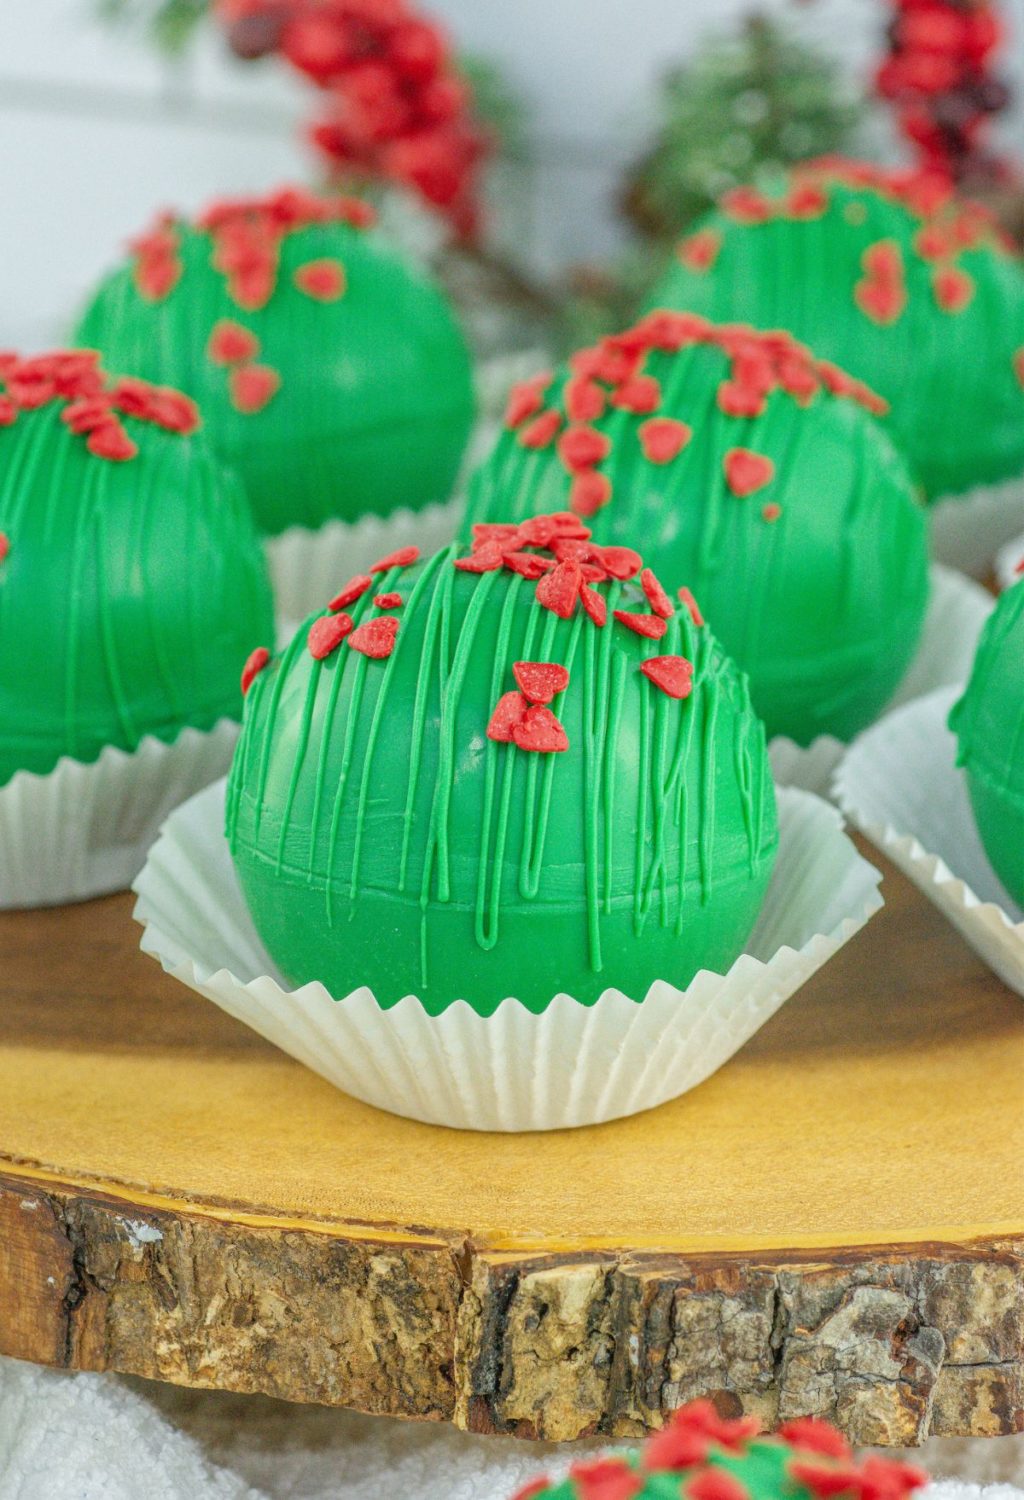 A group of green and red frosted cookies on a wooden board.